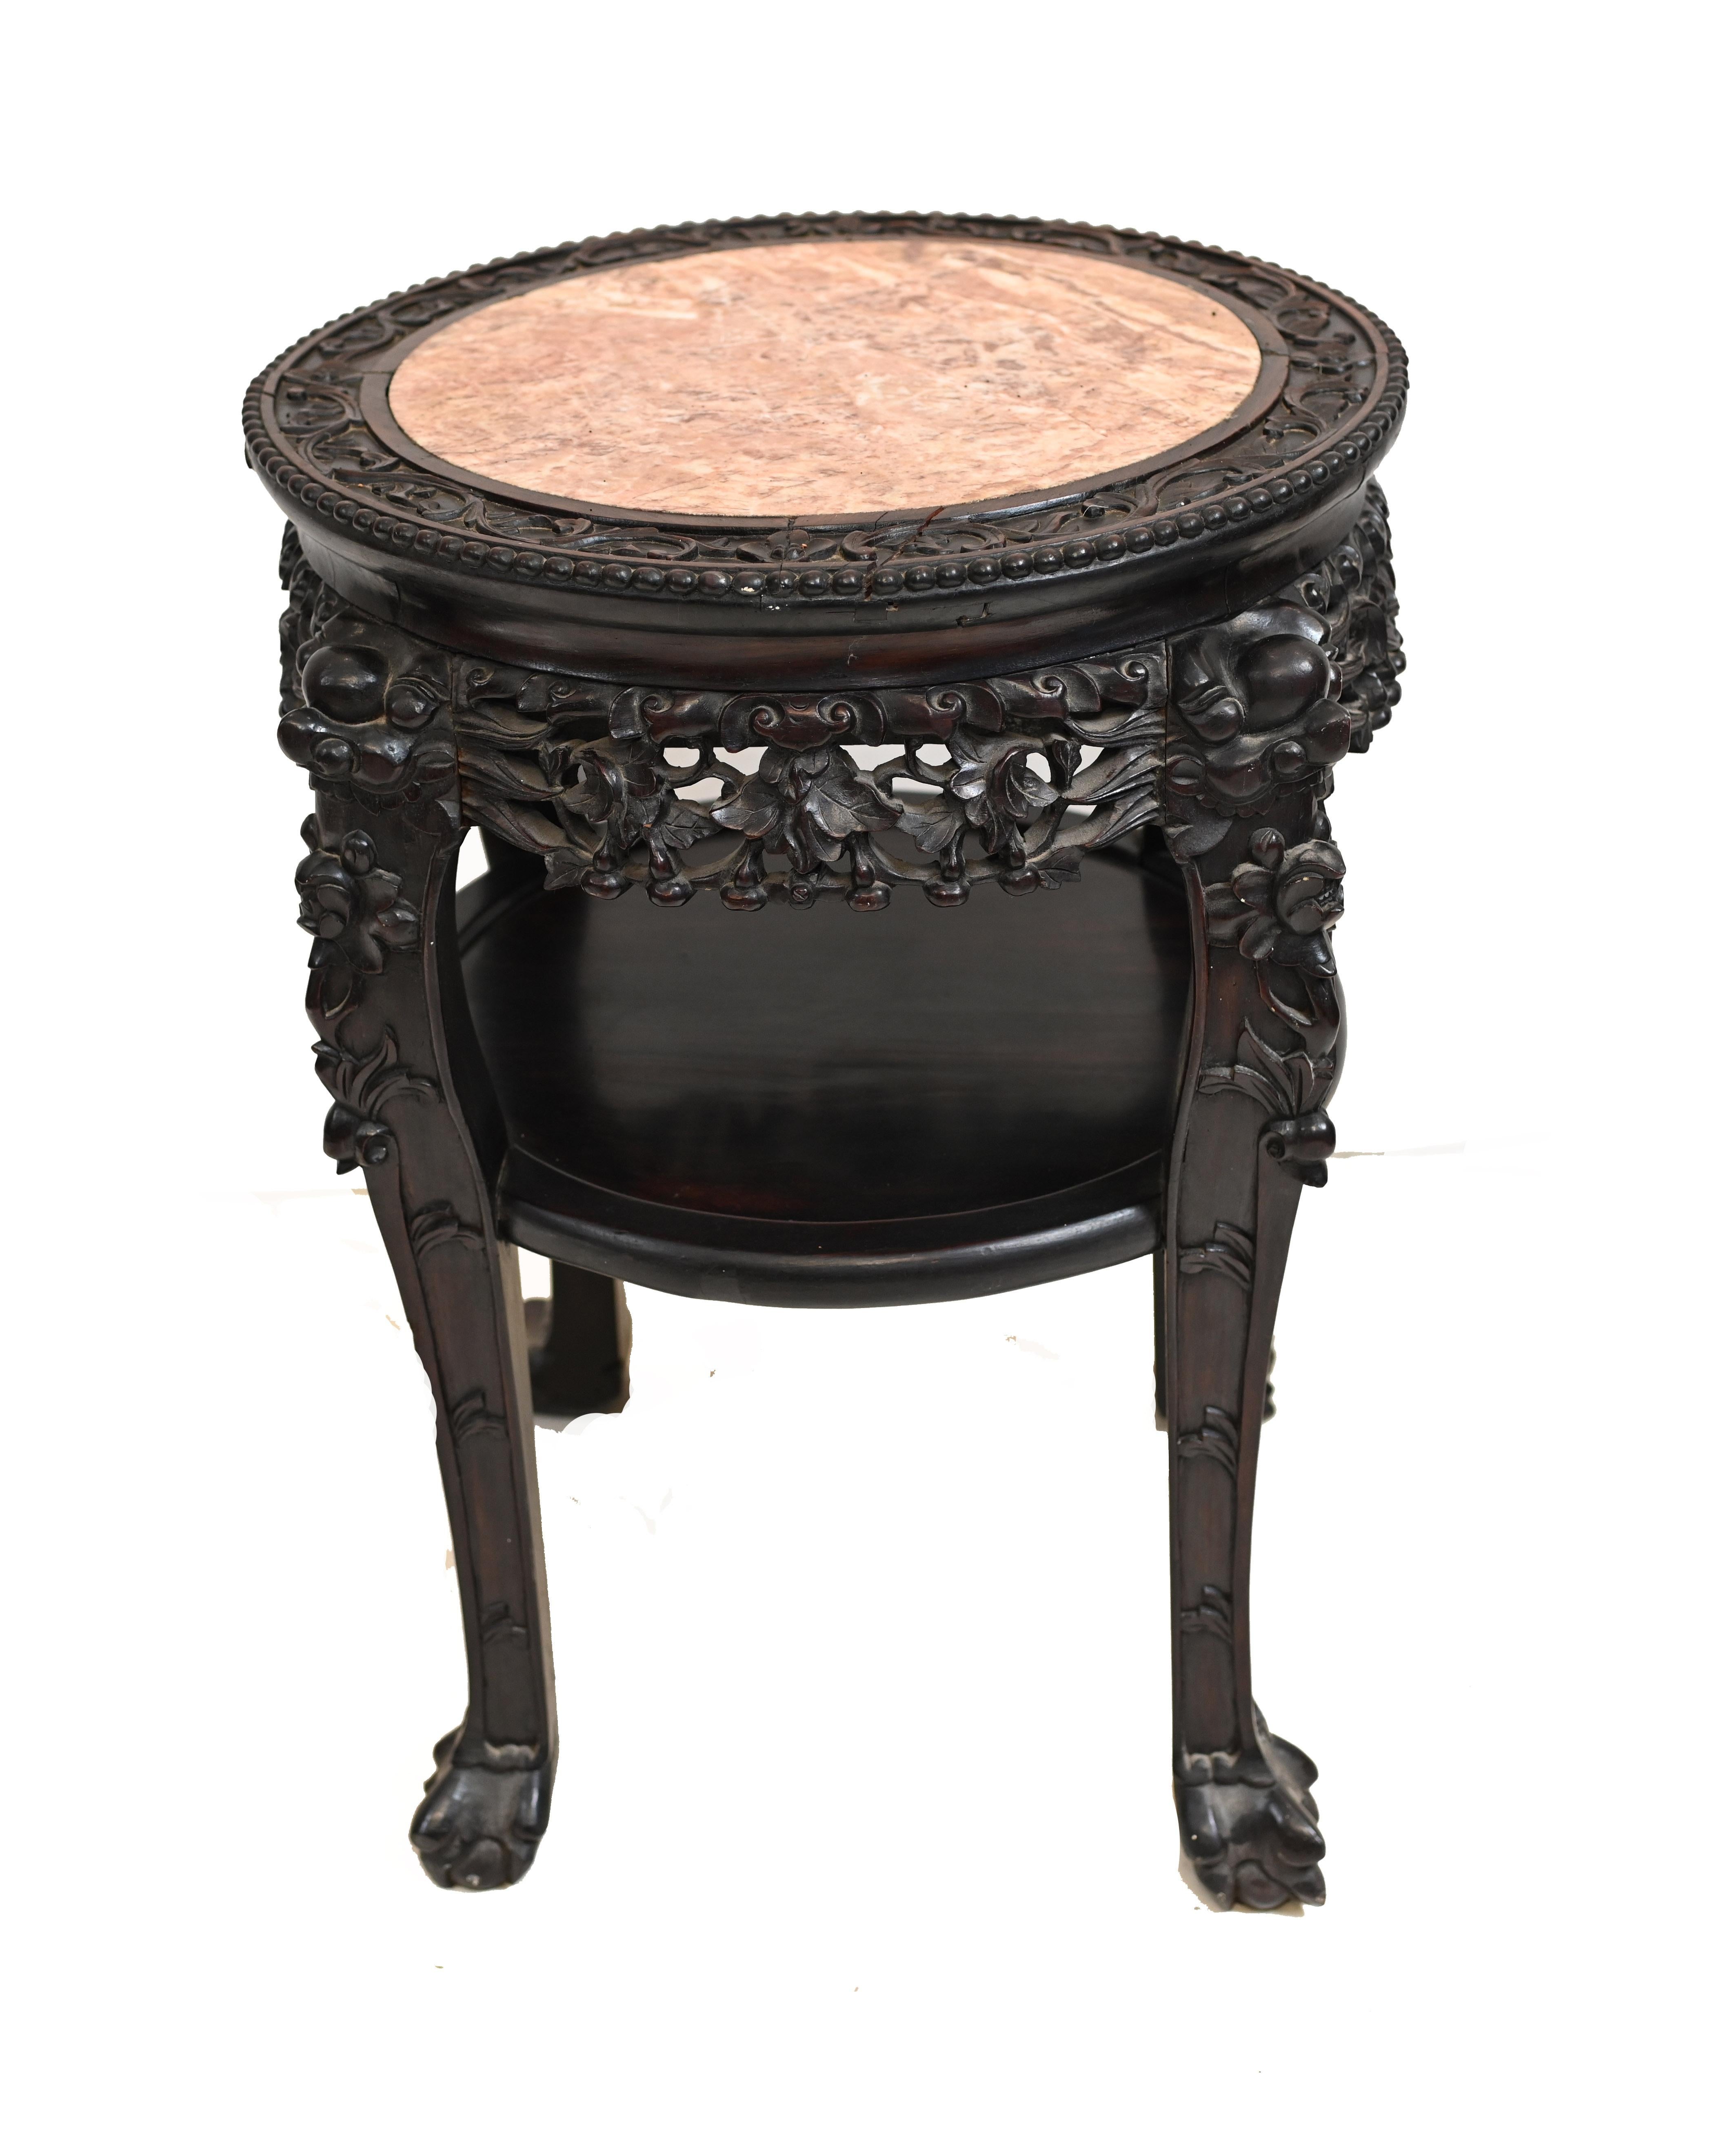 Gorgeous antique Chinese hardwood side table
Circa 1860 with round marble top 
Great designs to intricately carved base
Offered in great shape ready for home use right away
We ship to every corner of the planet.

   